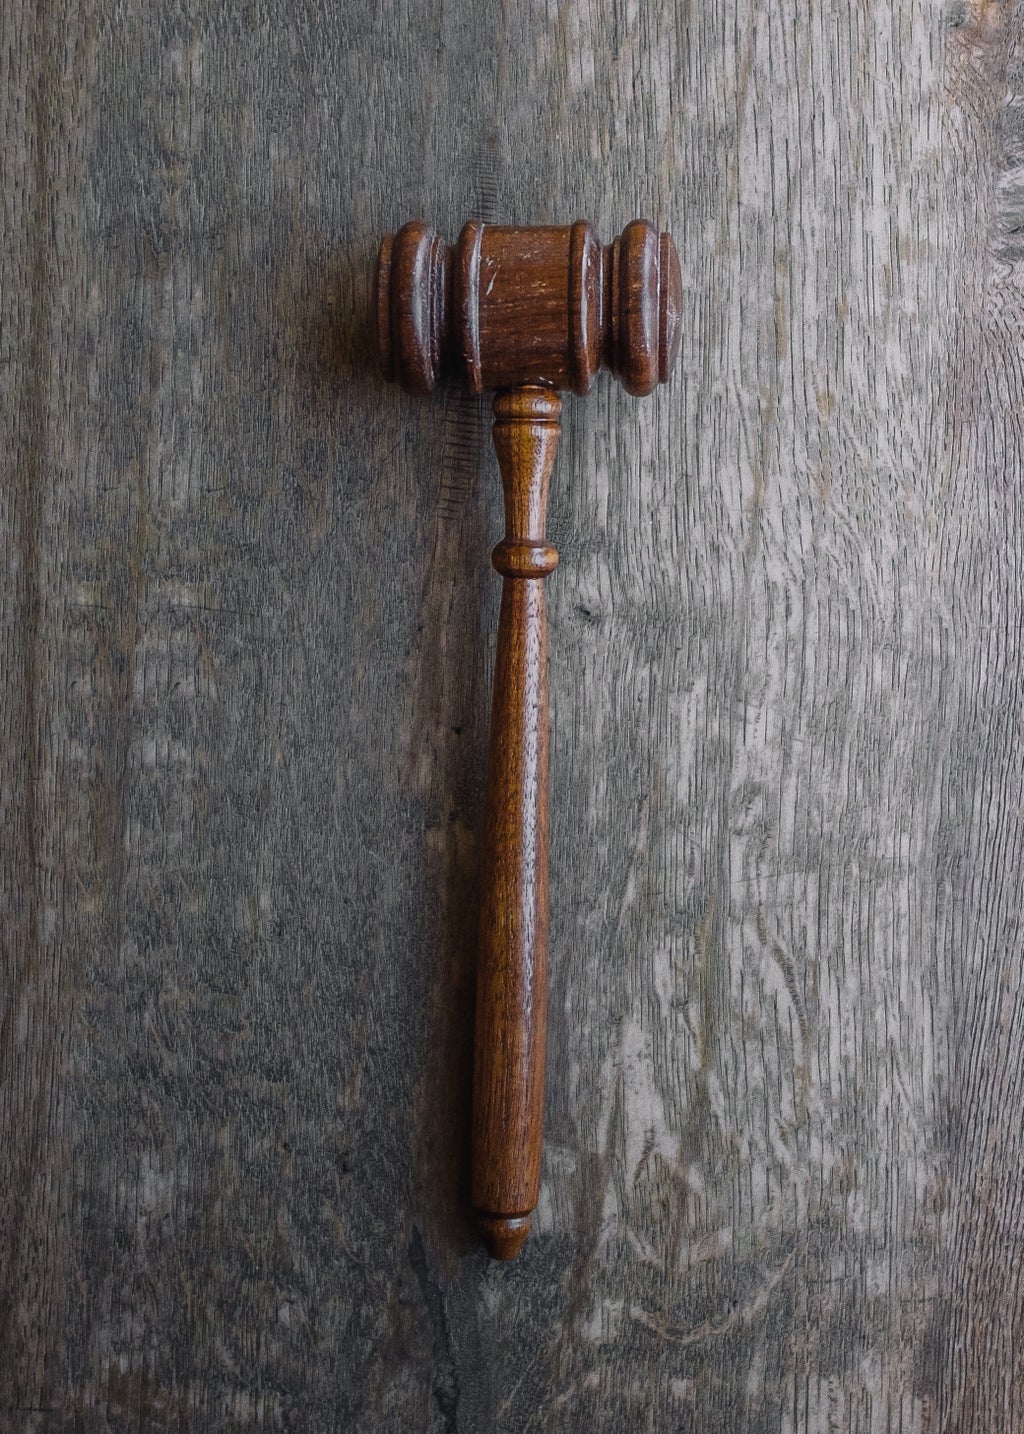 gavel sitting on a wooden table